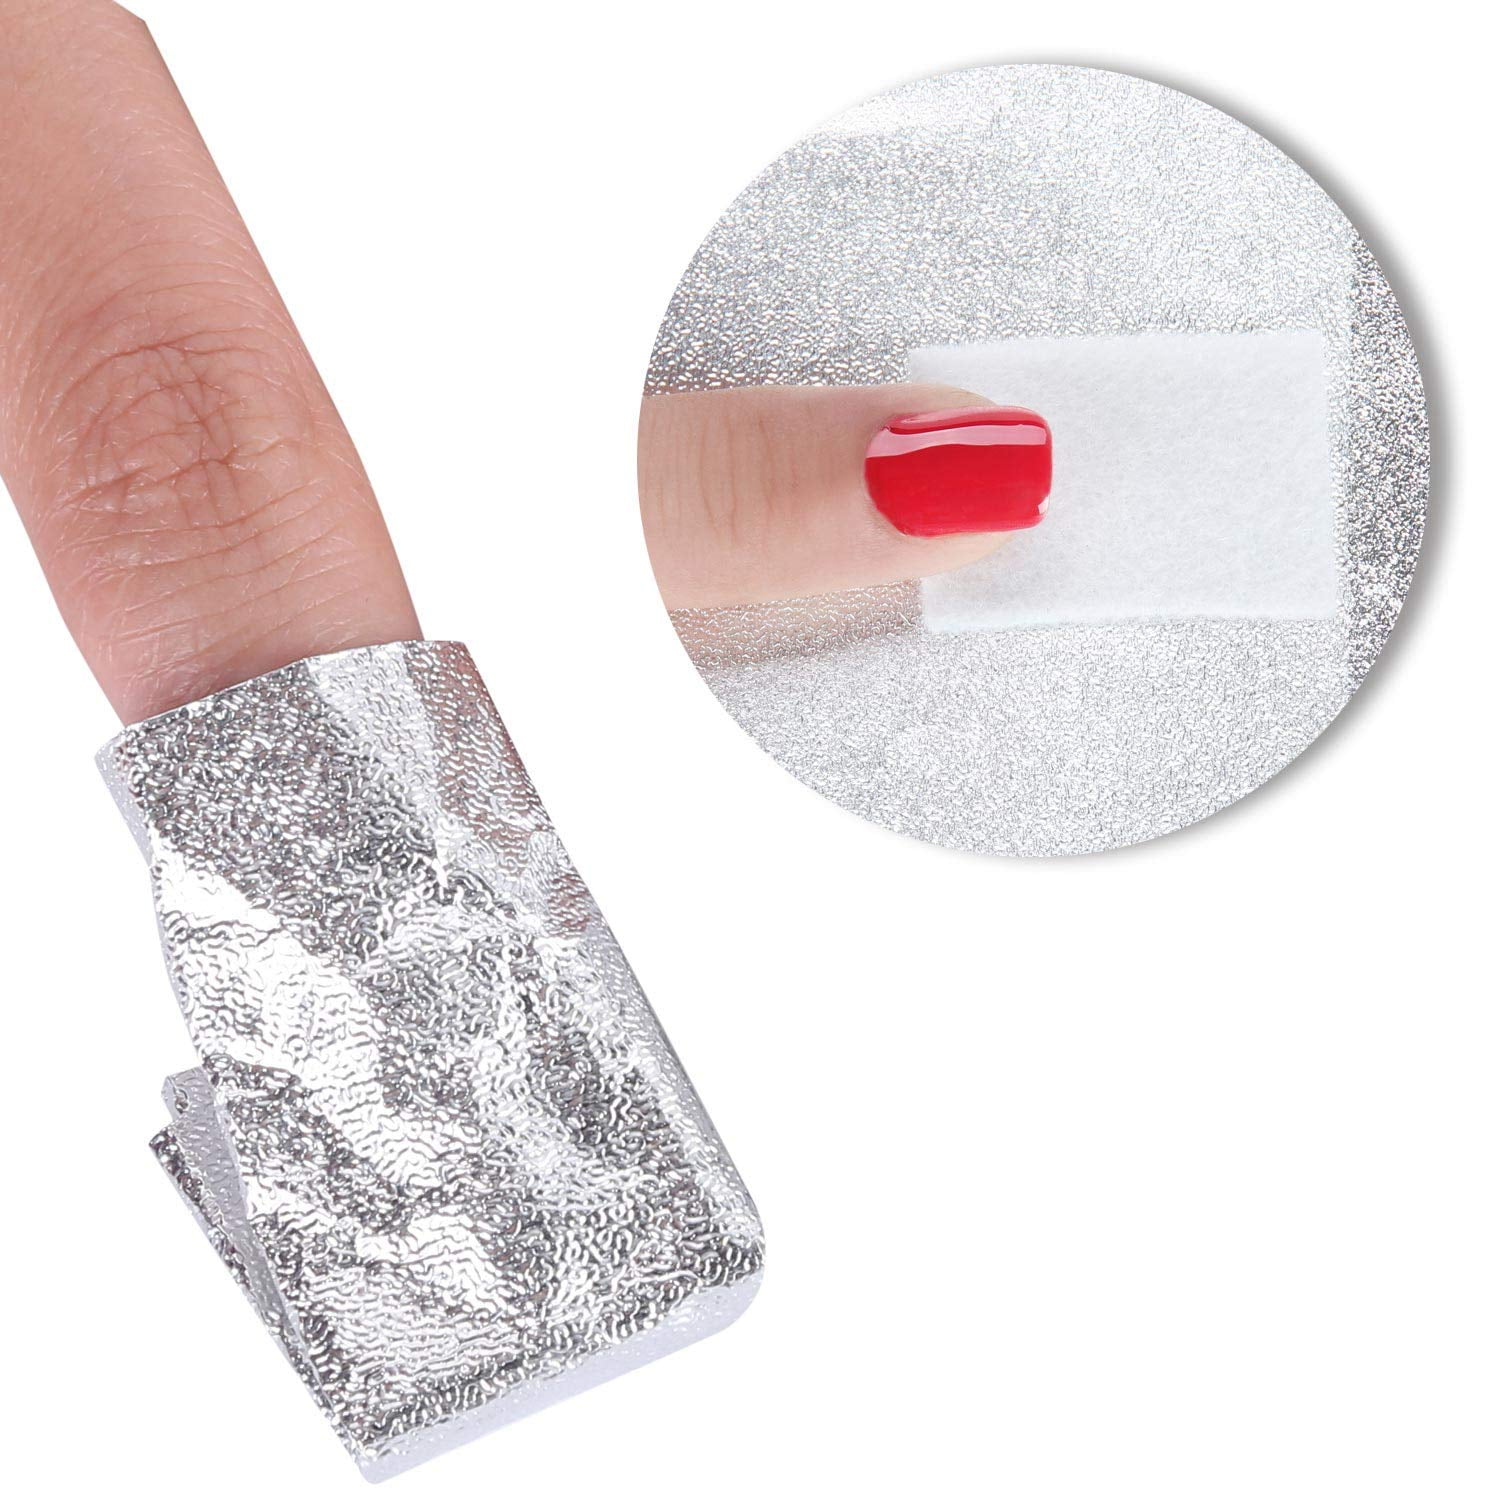 Nail Polish Off Remover 100pcs Foil Gel Gel Wrap Aluminum Foil Remover Tool Paper by with Large Cotton Polish Pad, Nail Soak Nail Remover Foils Wraps, - ROBOT-GXG Manicure